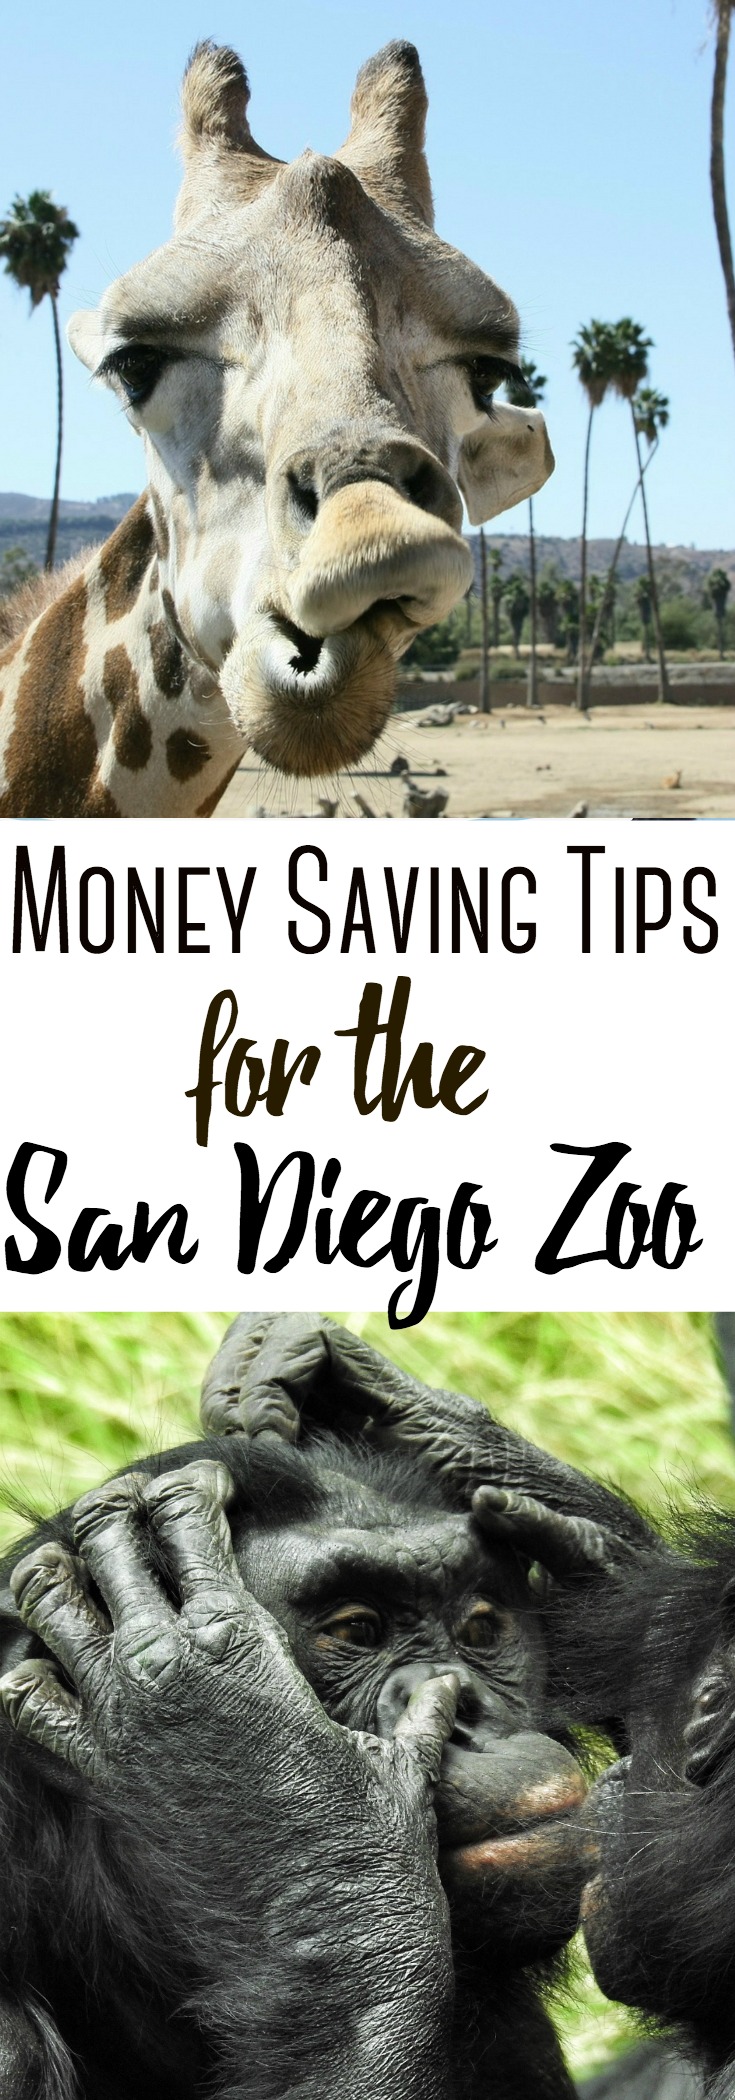 Planning a trip to Southern California? Here are several ways to save money at the San Diego Zoo! #sandiego #zoo #california #roadtrip #family #savingmoney